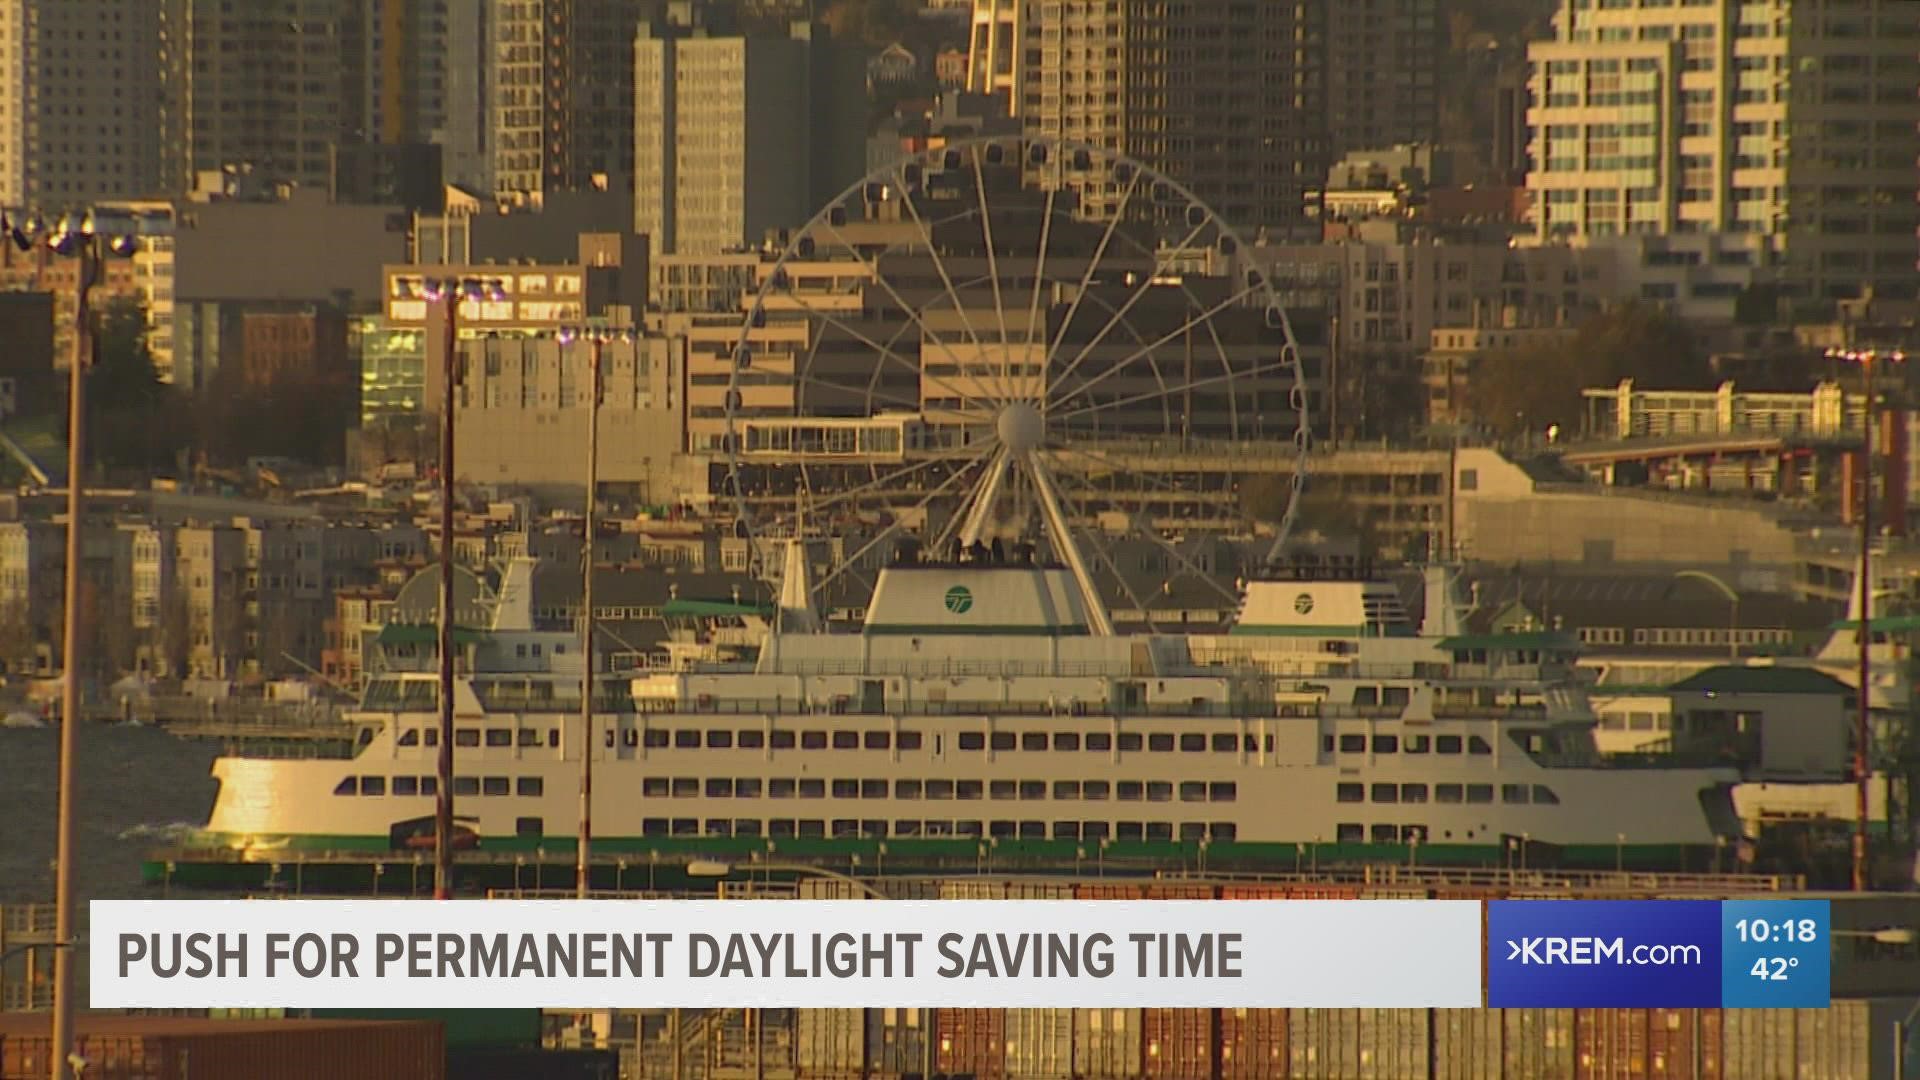 Sen. Patty Murray also called on the Biden Administration to allow states that have approved a permanent switch to daylight saving time federal waivers to do so.